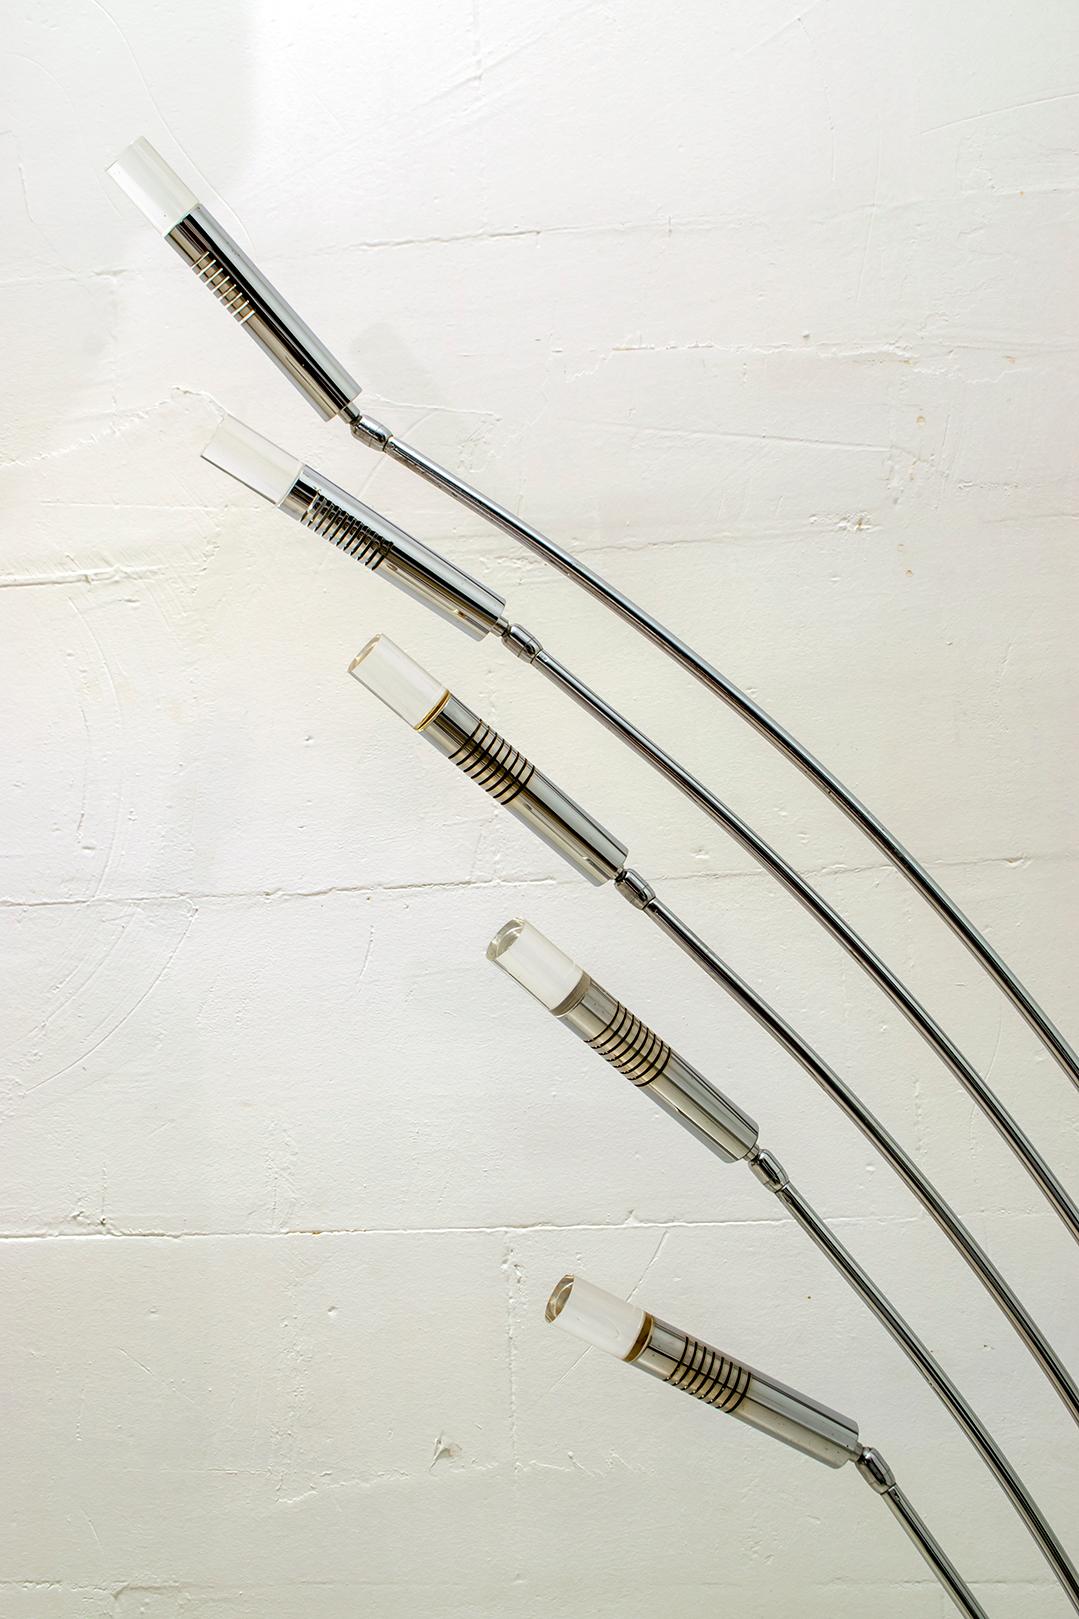 Midcentury Italian Arched Floor Lamp 5 Lights Chrome Metal and Lucite, 1960s For Sale 2